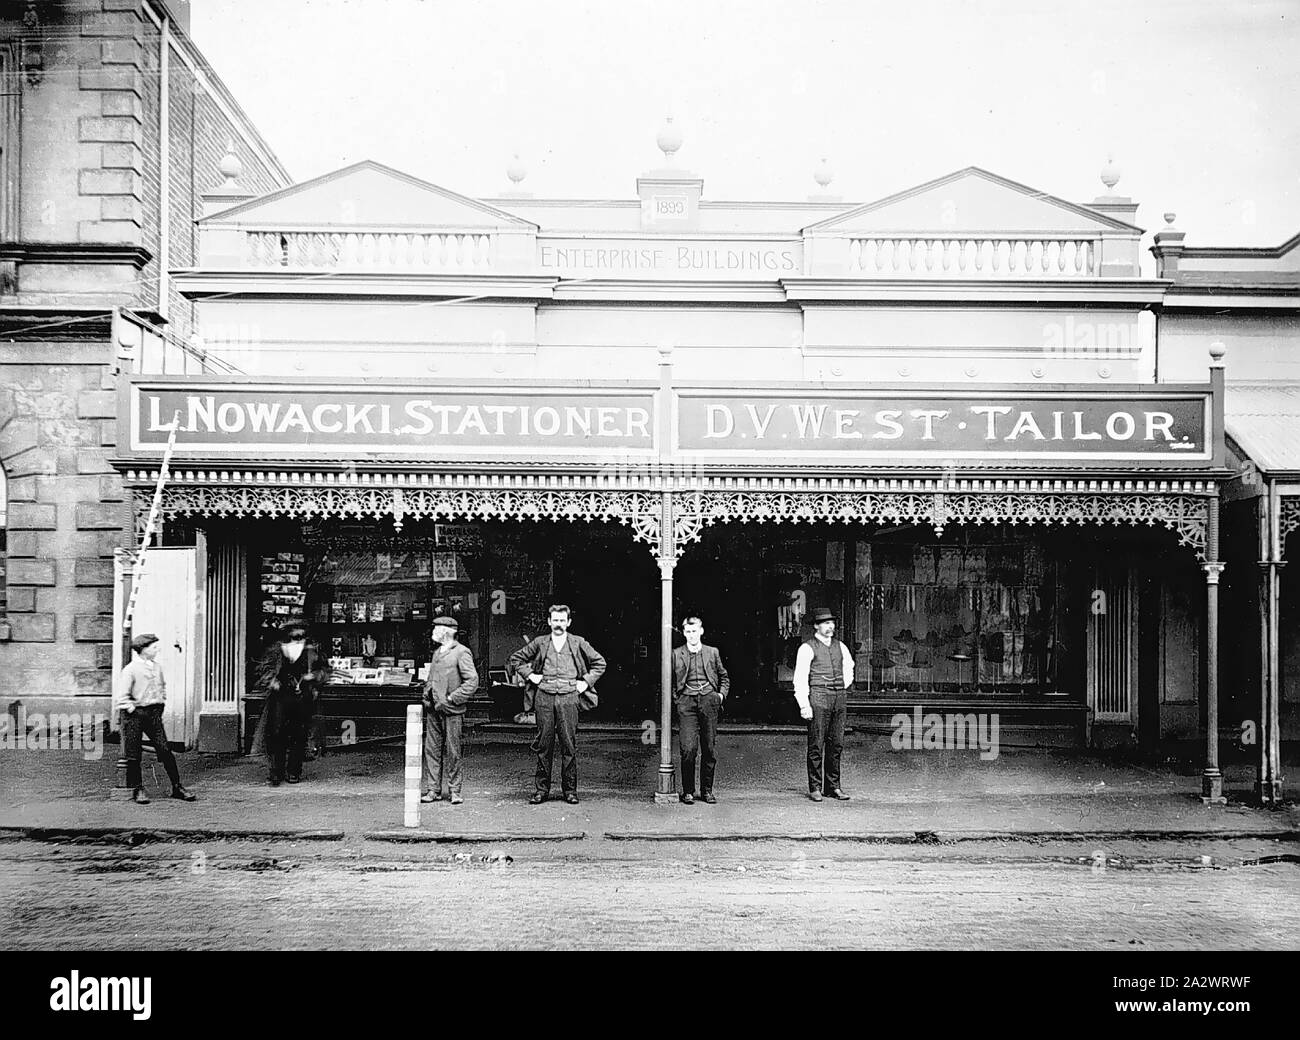 Negative - Casterton, Victoria, 1902, A group of men outside two shops forming the Enterprize Building, constructed in 1899. The two shops are 'L. Nowacki, stationer' and'D. V. West Tailor'. The old Mechanics Institute is on the left. There is wrought iron lacework above the verandah of the shops Stock Photo